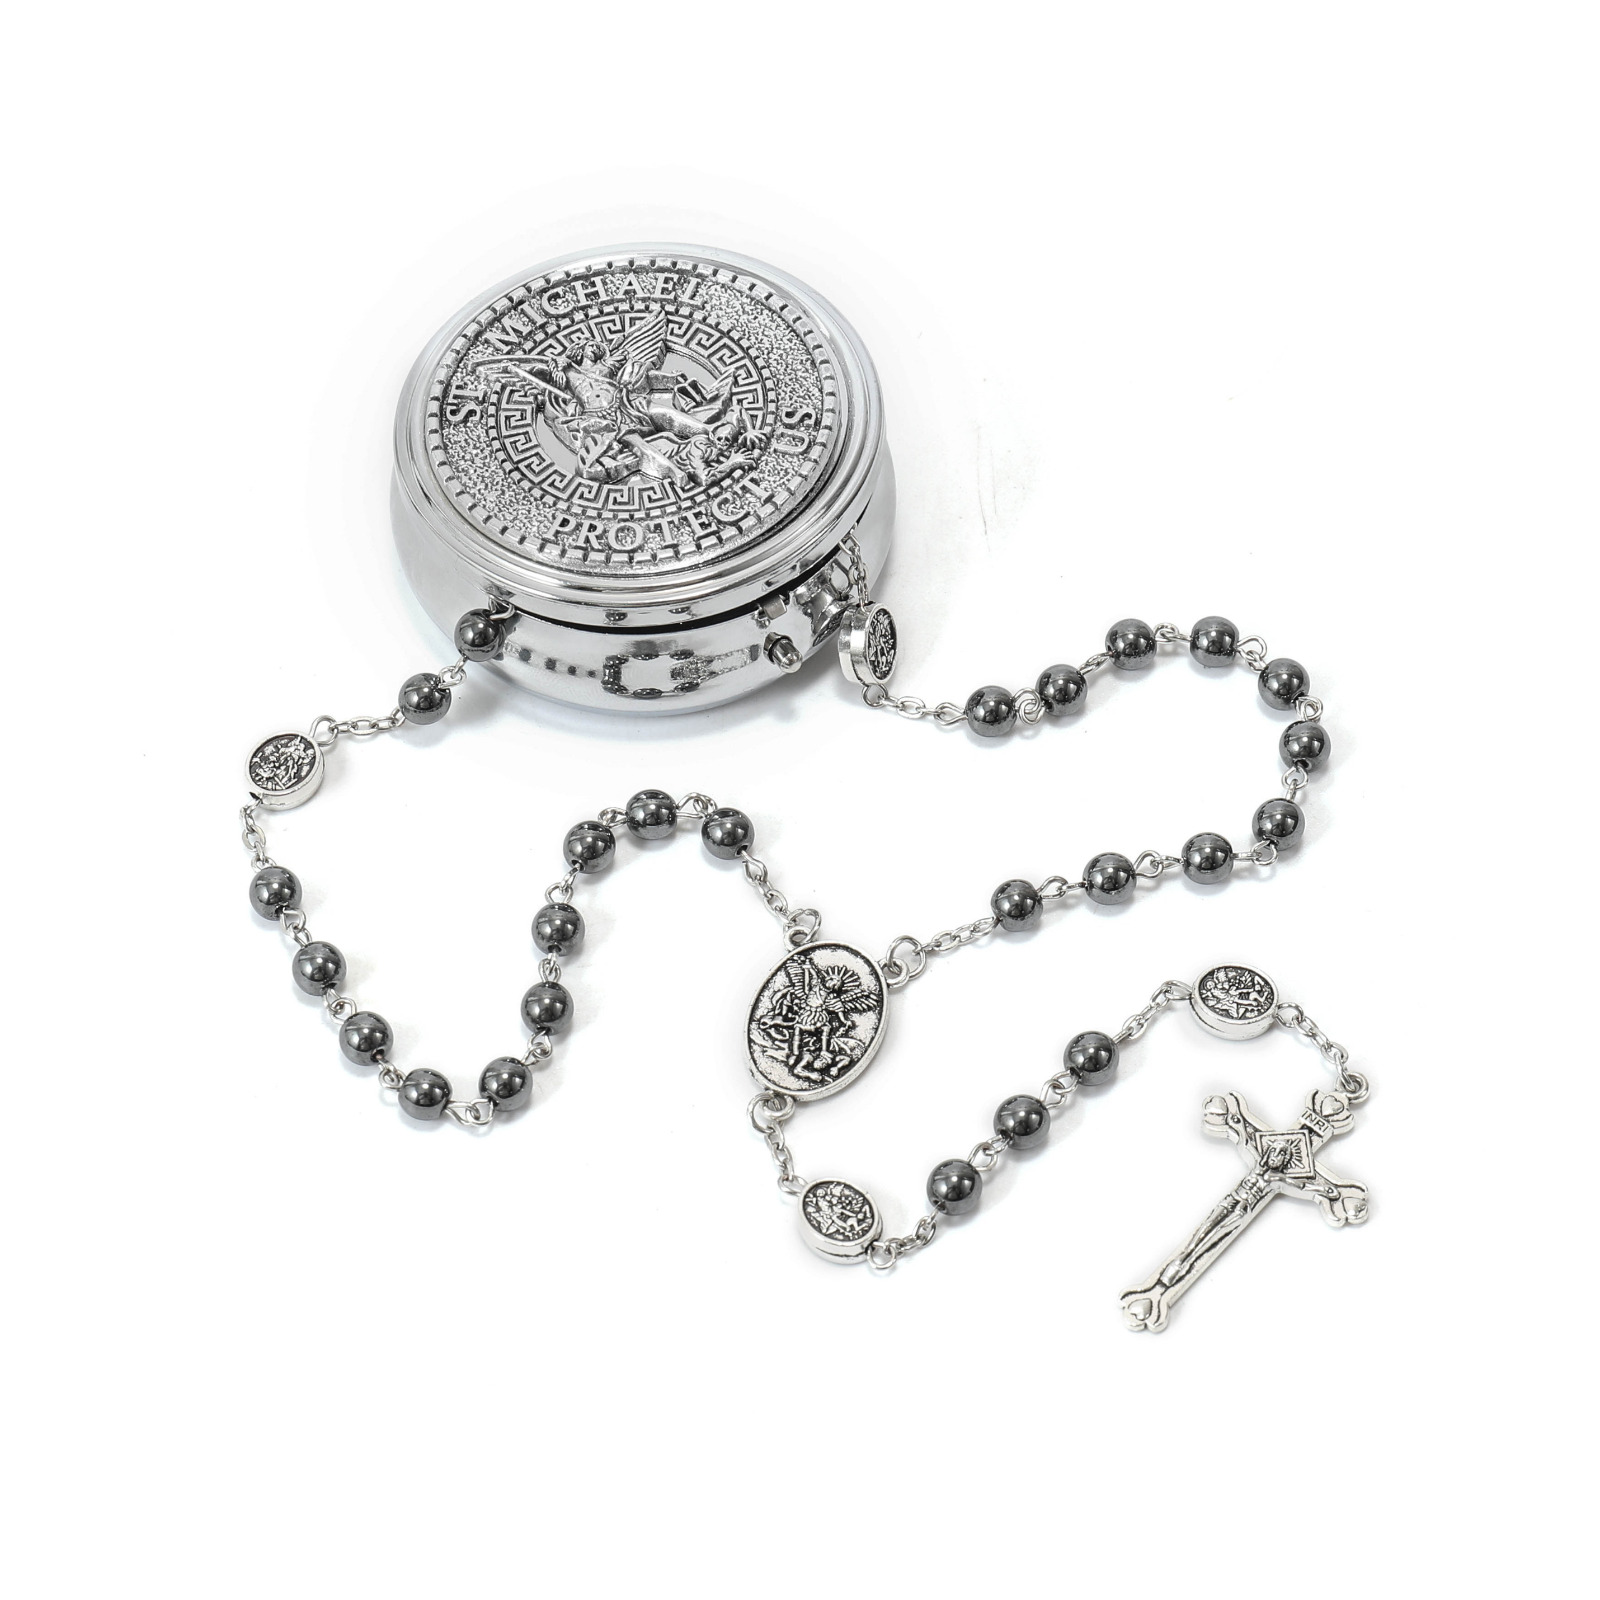 Antique Silver St Michael Black Hematite Stone Beads Rosary Necklace - Metal Box